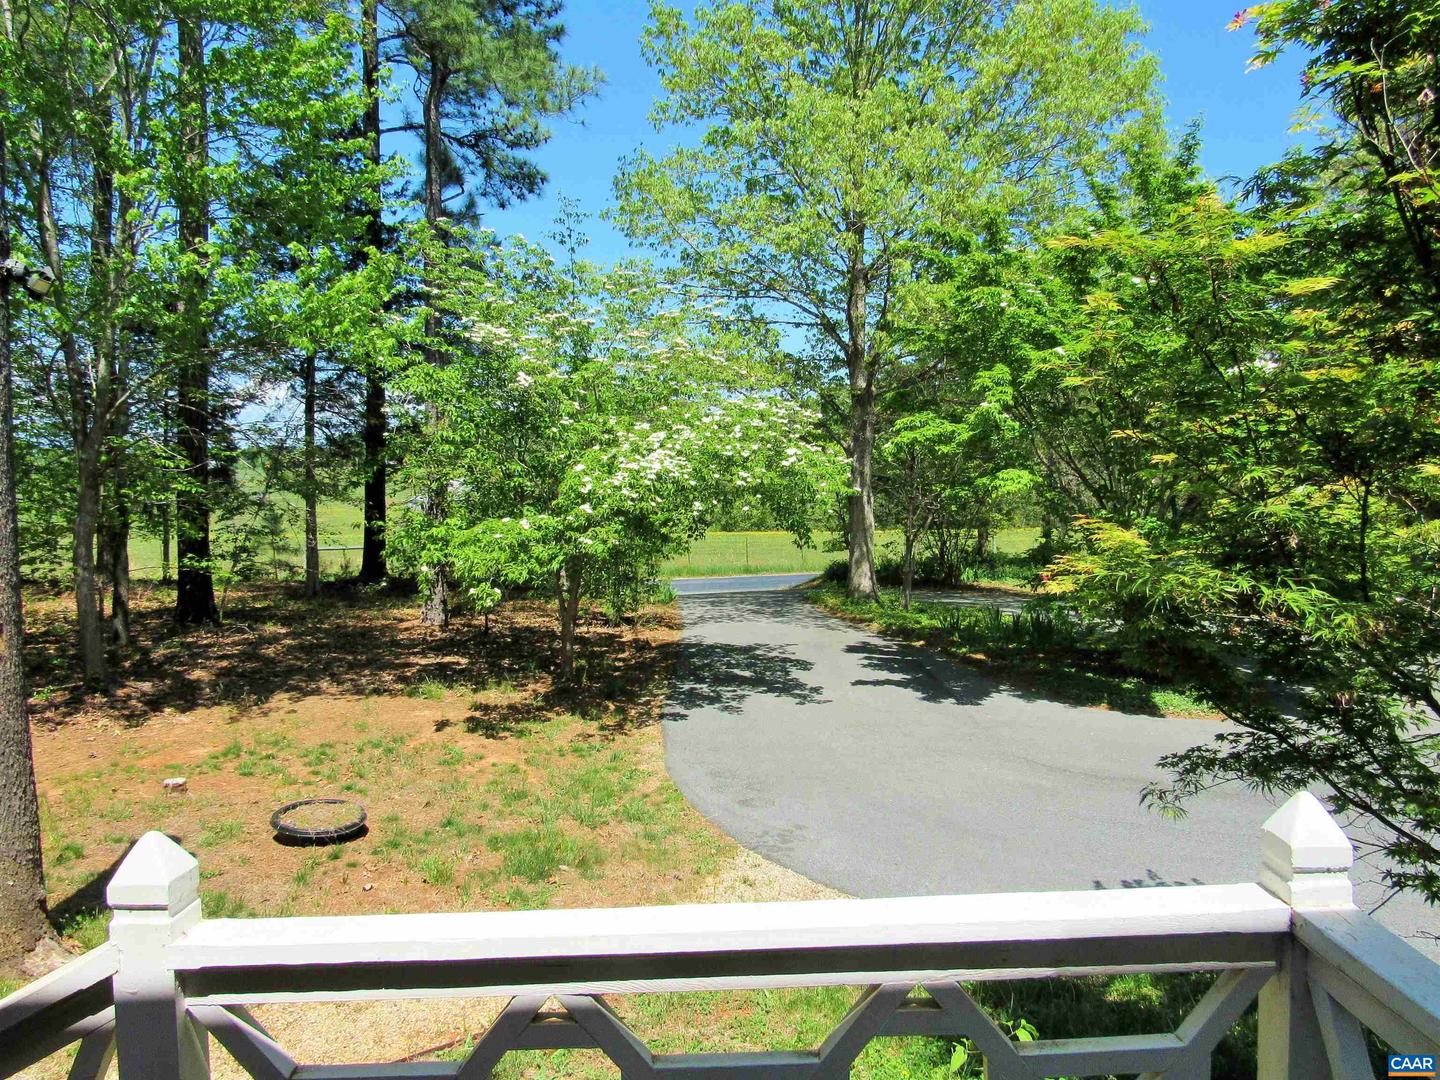 271 E MONITOR RD, AMHERST, Virginia 24521, 3 Bedrooms Bedrooms, ,2 BathroomsBathrooms,Residential,For sale,271 E MONITOR RD,652535 MLS # 652535